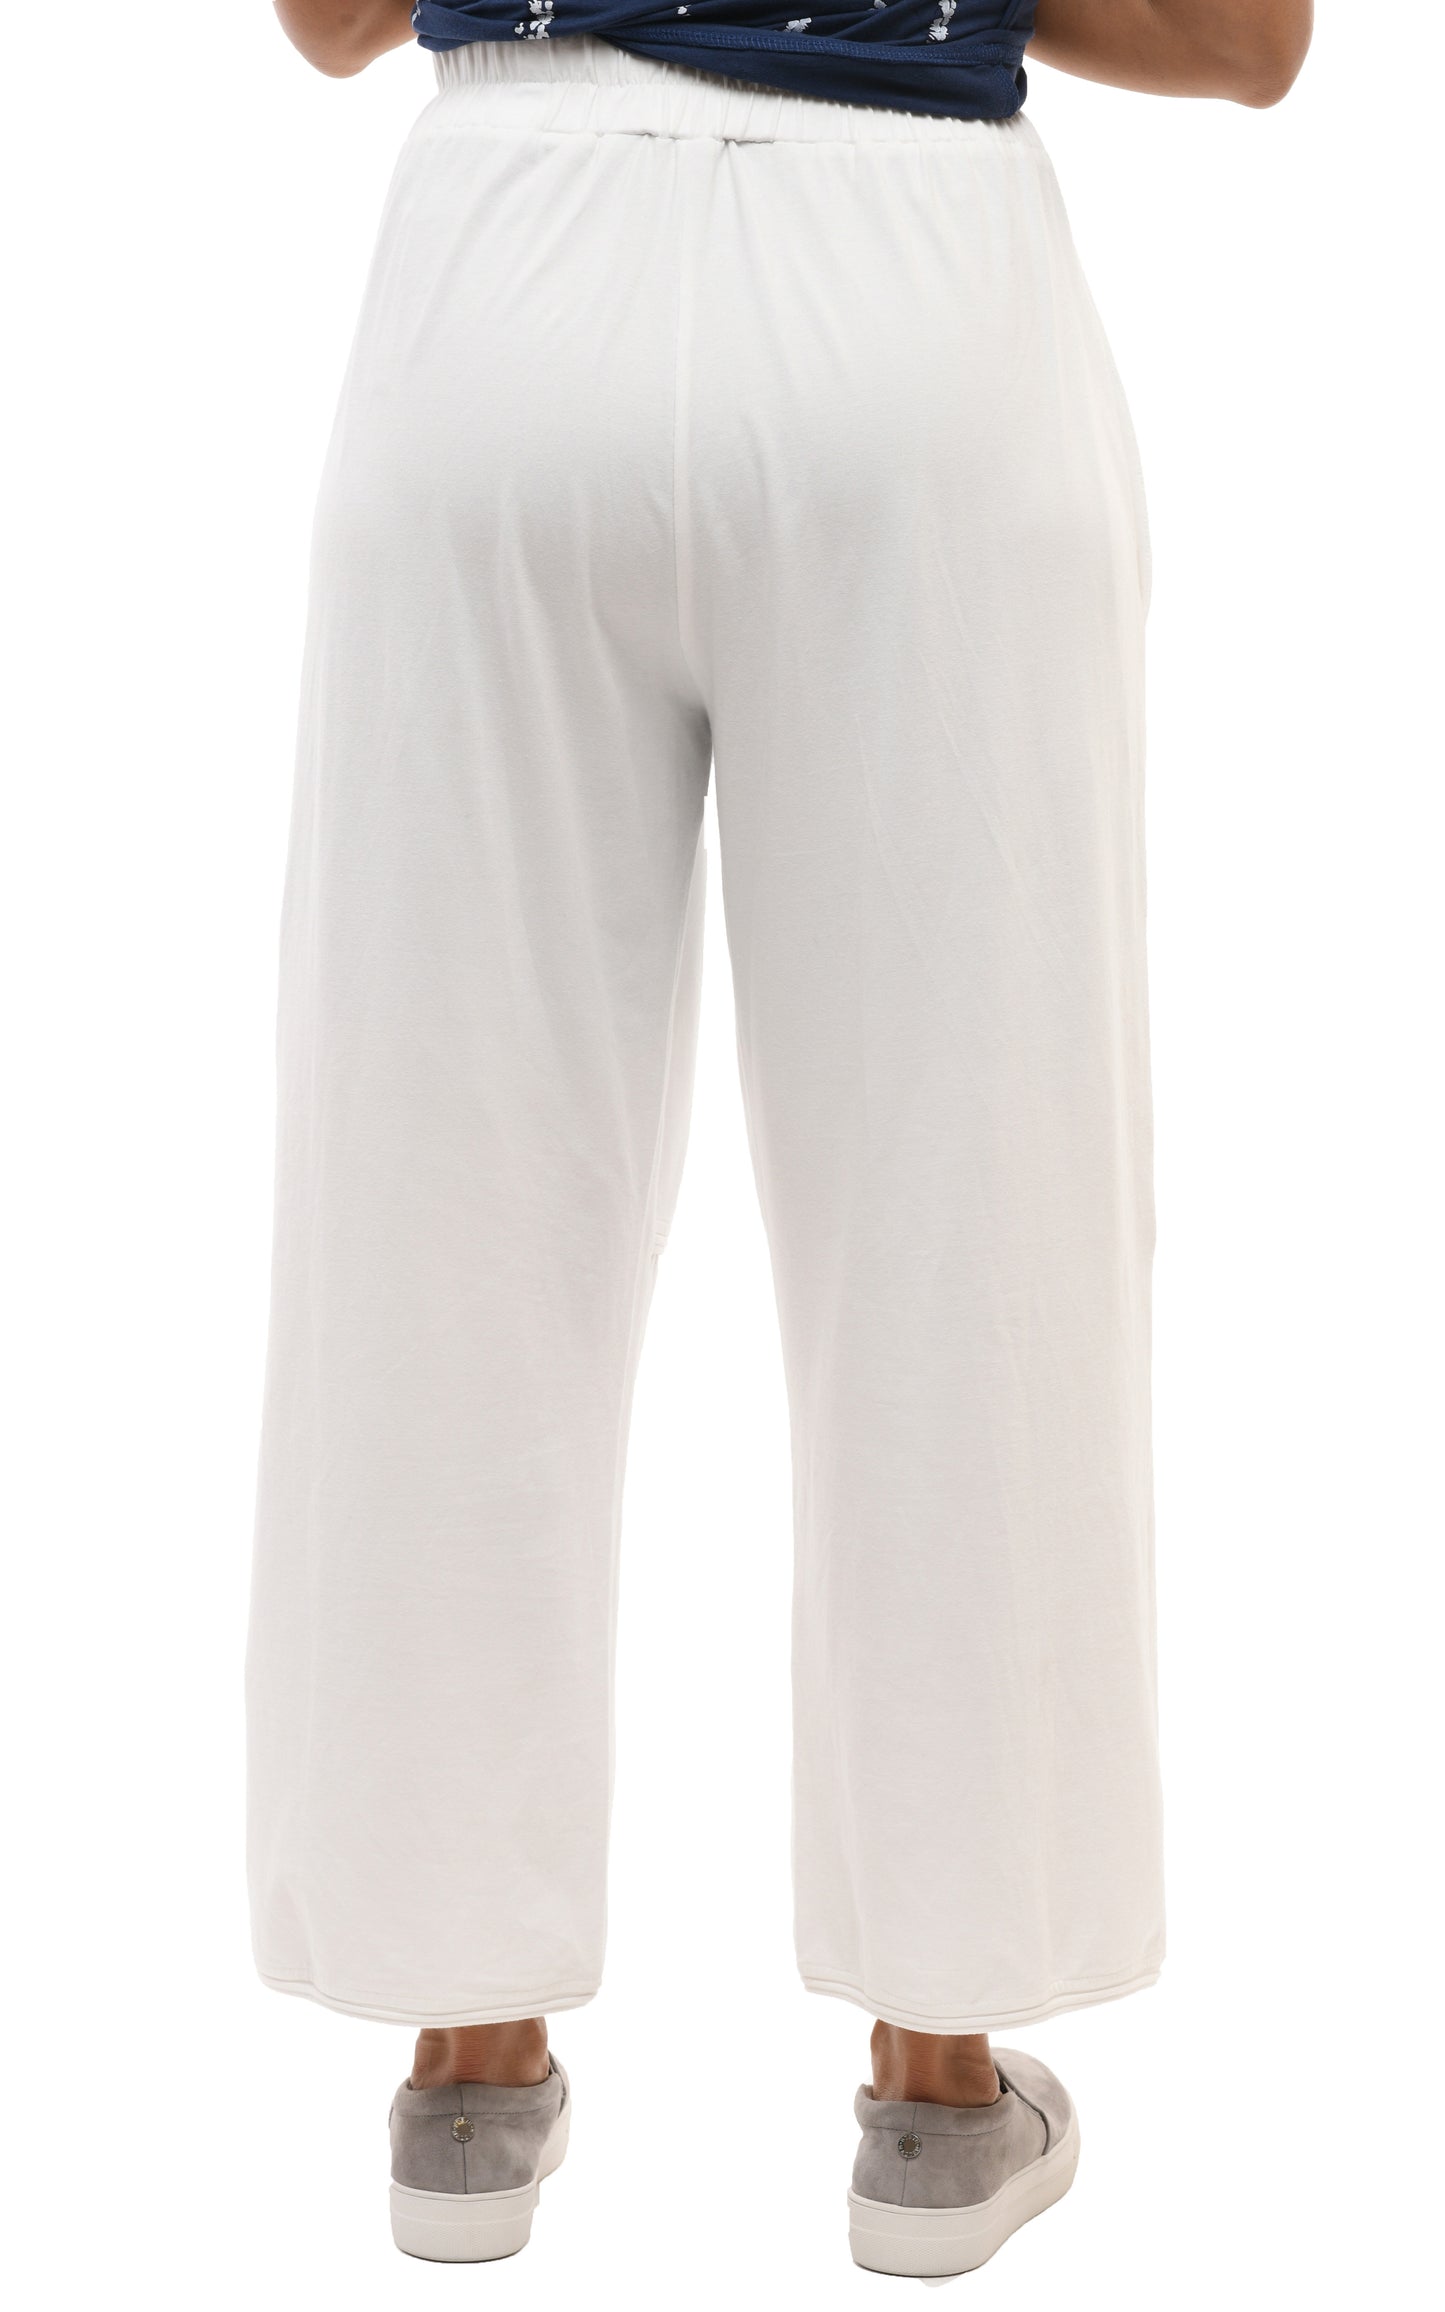 Laila Lounge Pant in Cream Cotton by Snapdragon & Twig (Modal)